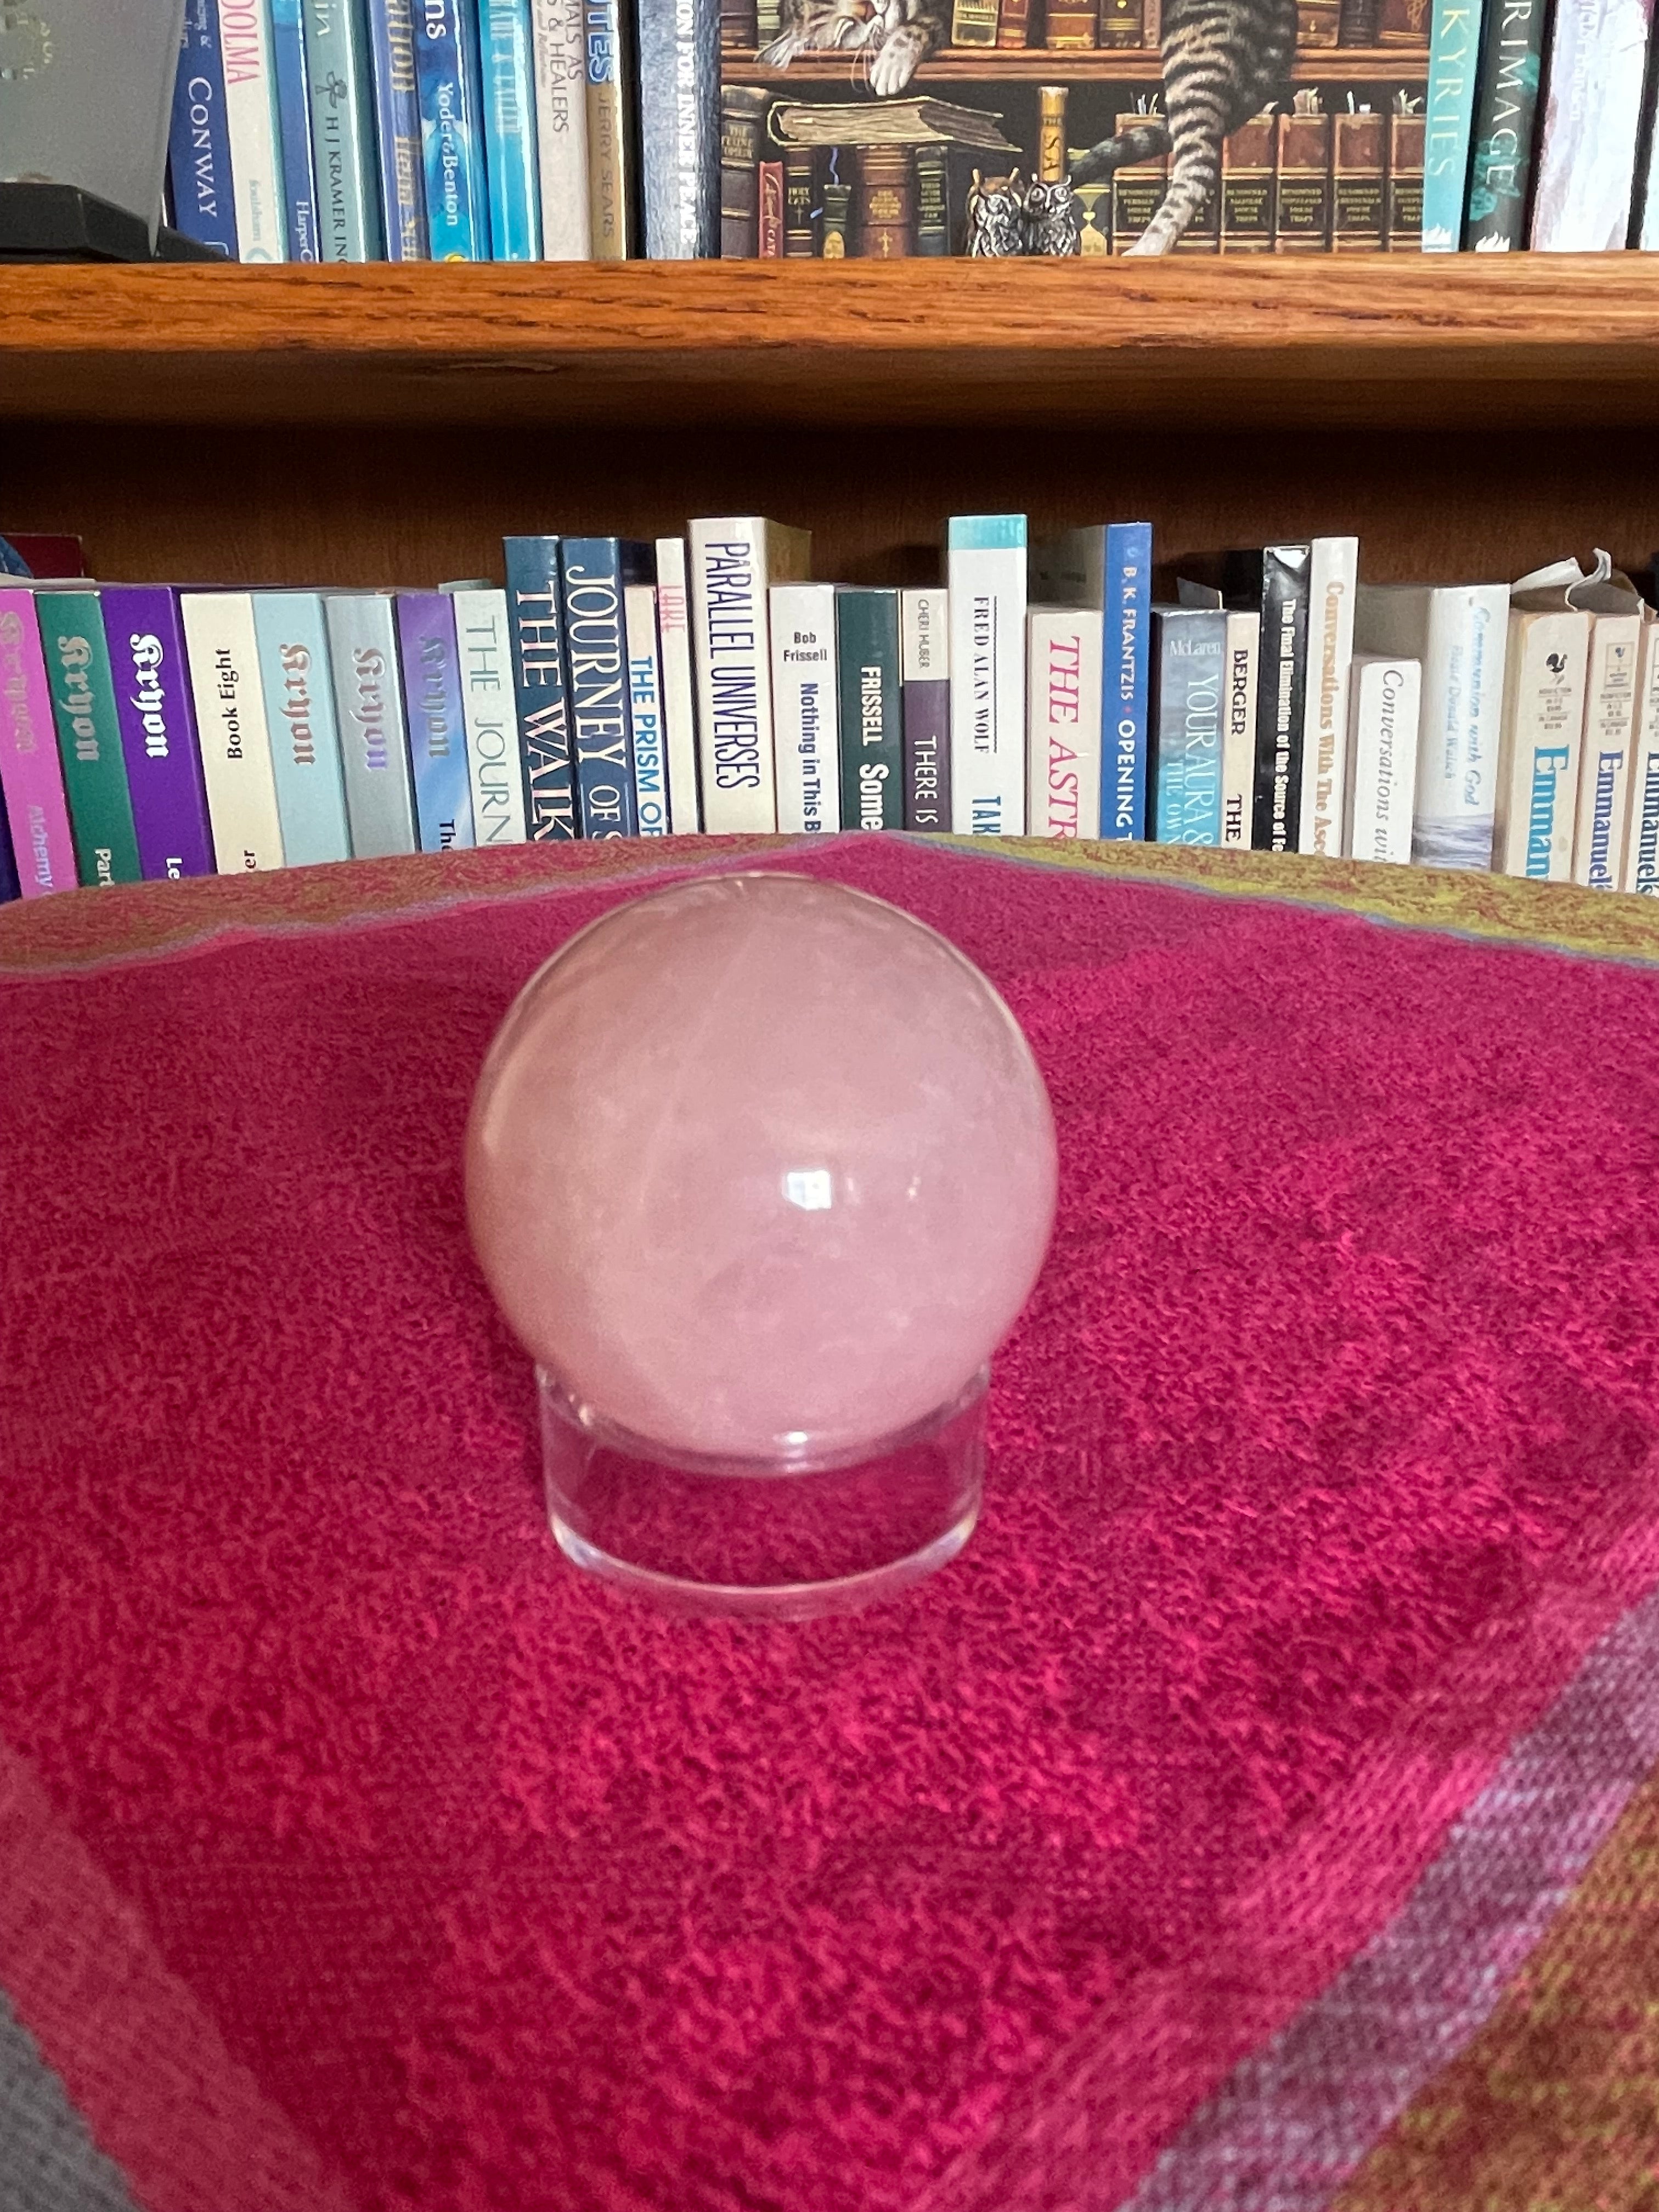 Display with sphere. Your basic clear plastic ring to display crystal spheres or eggs. Use to keep your crystal spheres and eggs in place, rather than rolling off your altar, table or nightstand - lol. This is the medium size I have at approximately 1.26"x0.43" (d/h). The 3rd photo shows all three sizes I offer. Check out my crystal spheres and my ruby-in-matrix eggs and Judy Hall's The Crystal Bible Books - they are awesome! Cost of sphere display ring is 75 cents and can only be bought as an add-on item).